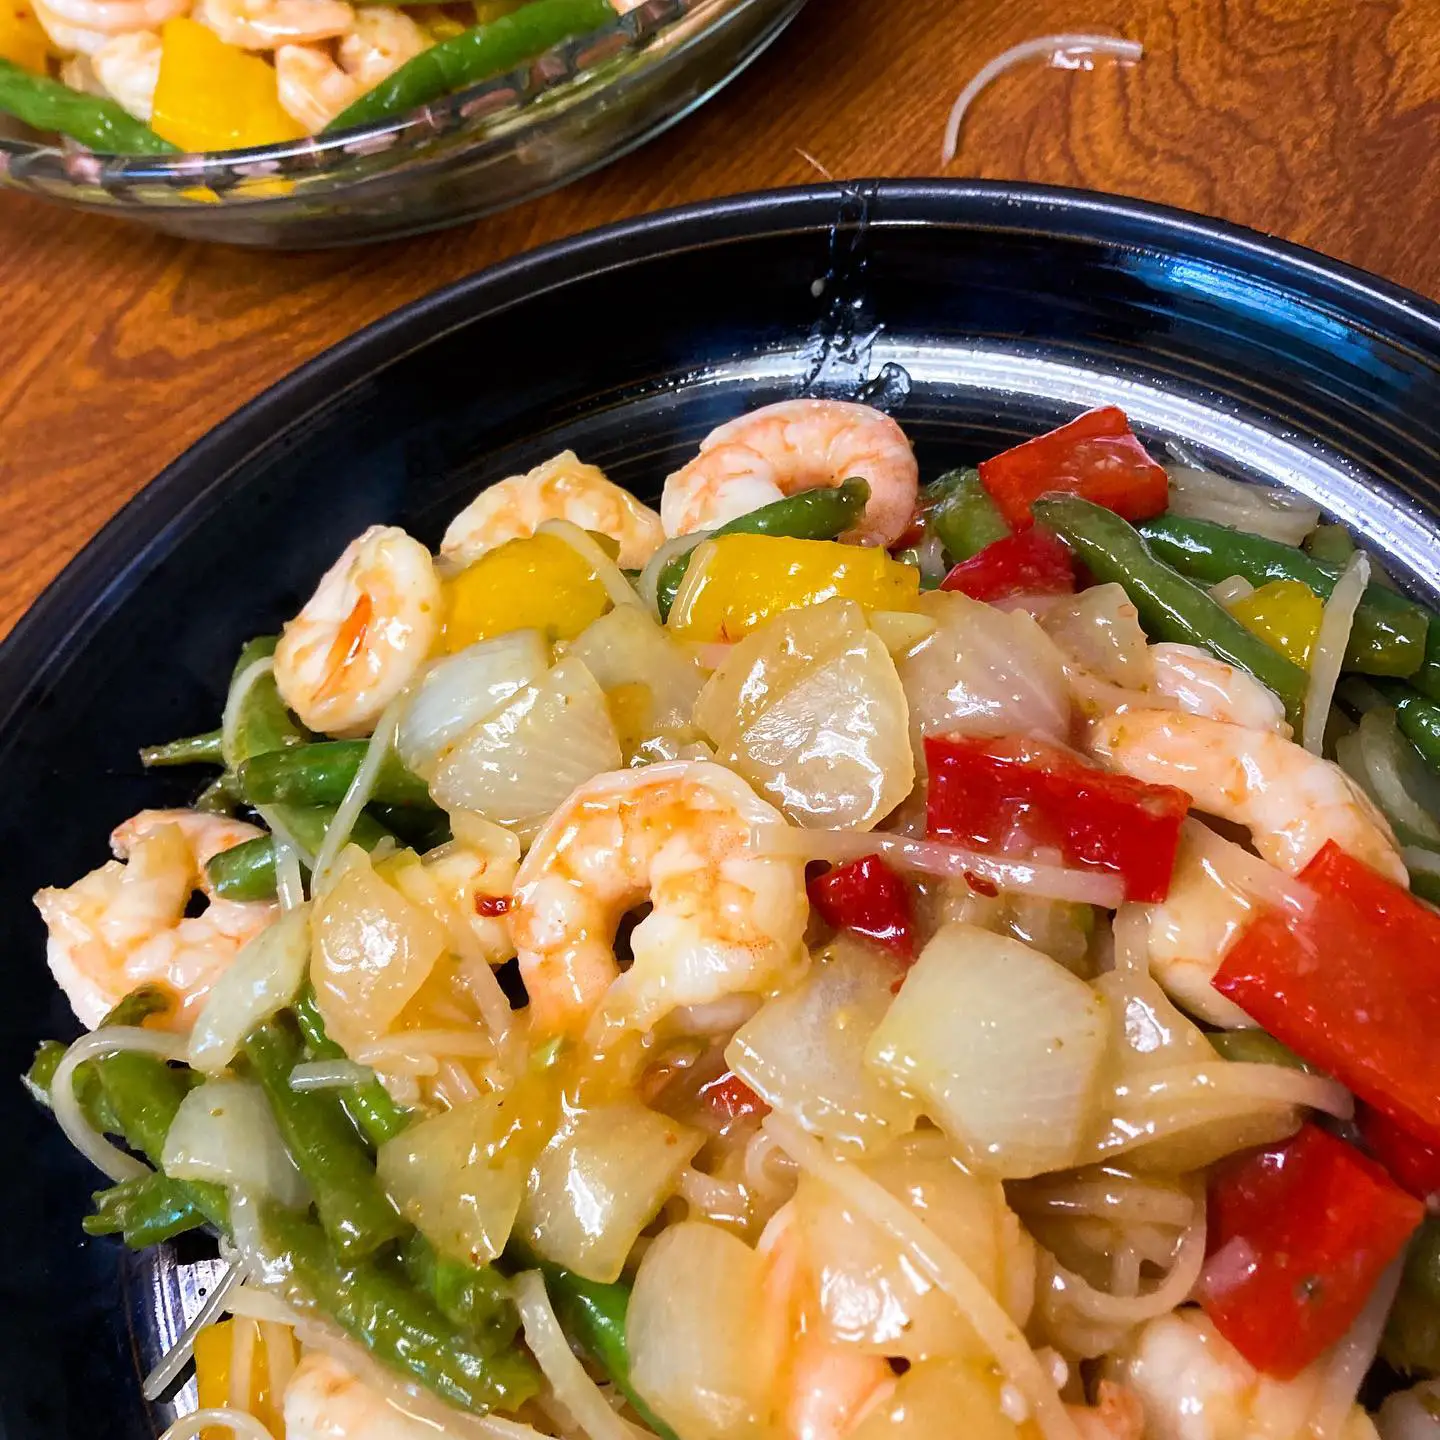 There is something about misspelling the word shrimp that makes me unbelievably happy inside—shramp, skrimp, shromp, shrymp—I love them all! . . . This is a shrimp stir fry with rice noodles, green beans, onions, bell peppers, and orange sauce! If you haven’t had a good stir fry lately here’s your sign that it’s time! What are your favorite things to put in a stir fry? . . . . . #stirfry #shrimp #chinesefood #healthyfood #cooking #cookingathome #feedfeed #f52grams #foodblog #foodblogfeed #heresmyfood #onmytable #dailyfoodfeed #thekitchn #foodstagram #eatrealfood #foodphotooftheday #dmvblogger #blackblogger